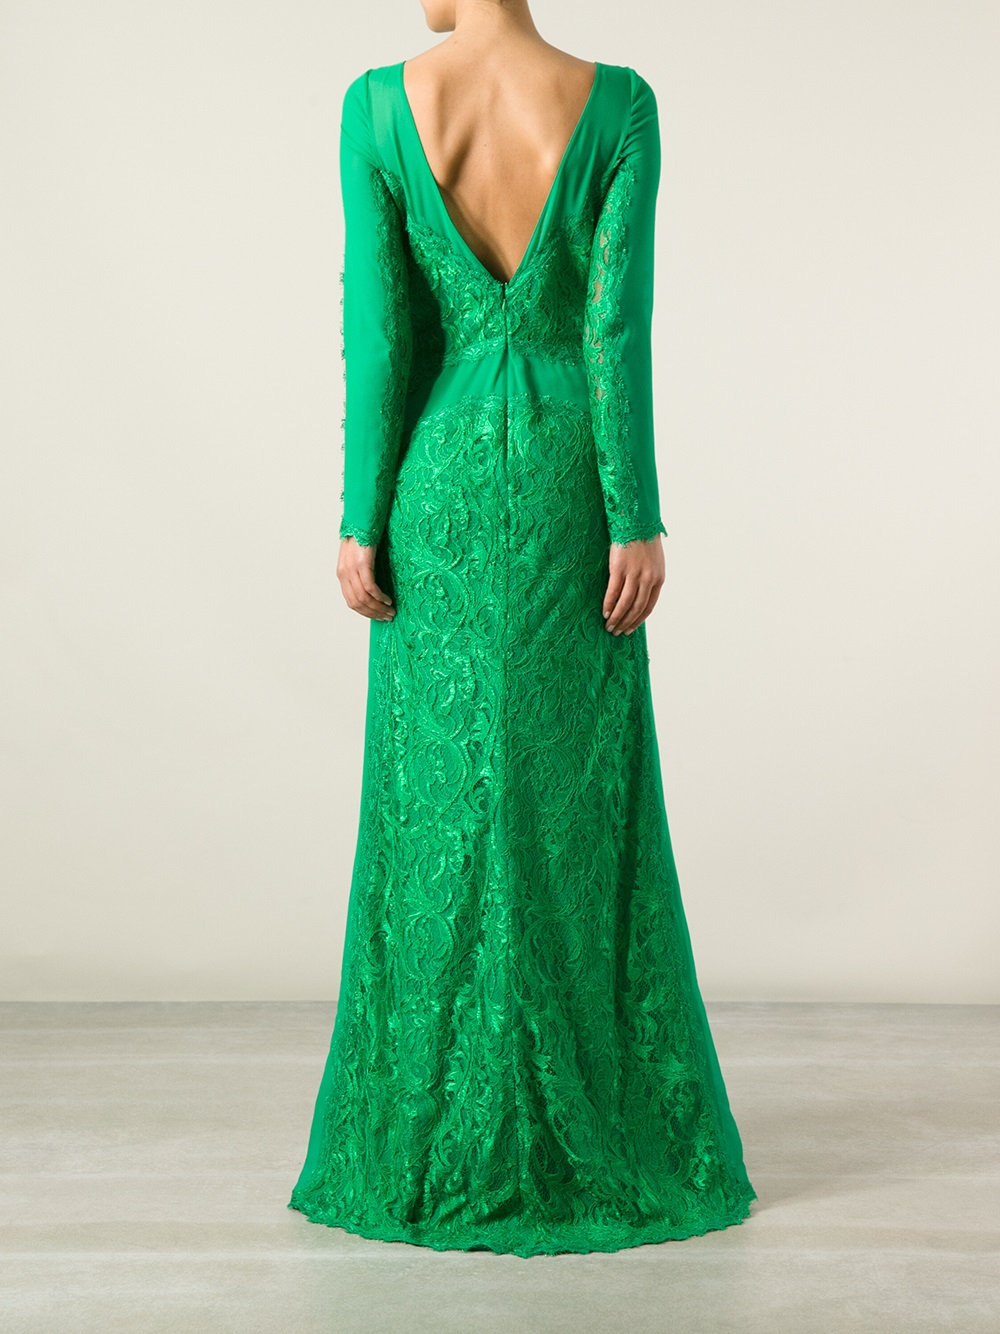 Lyst - Emilio pucci Lace Gown in Green